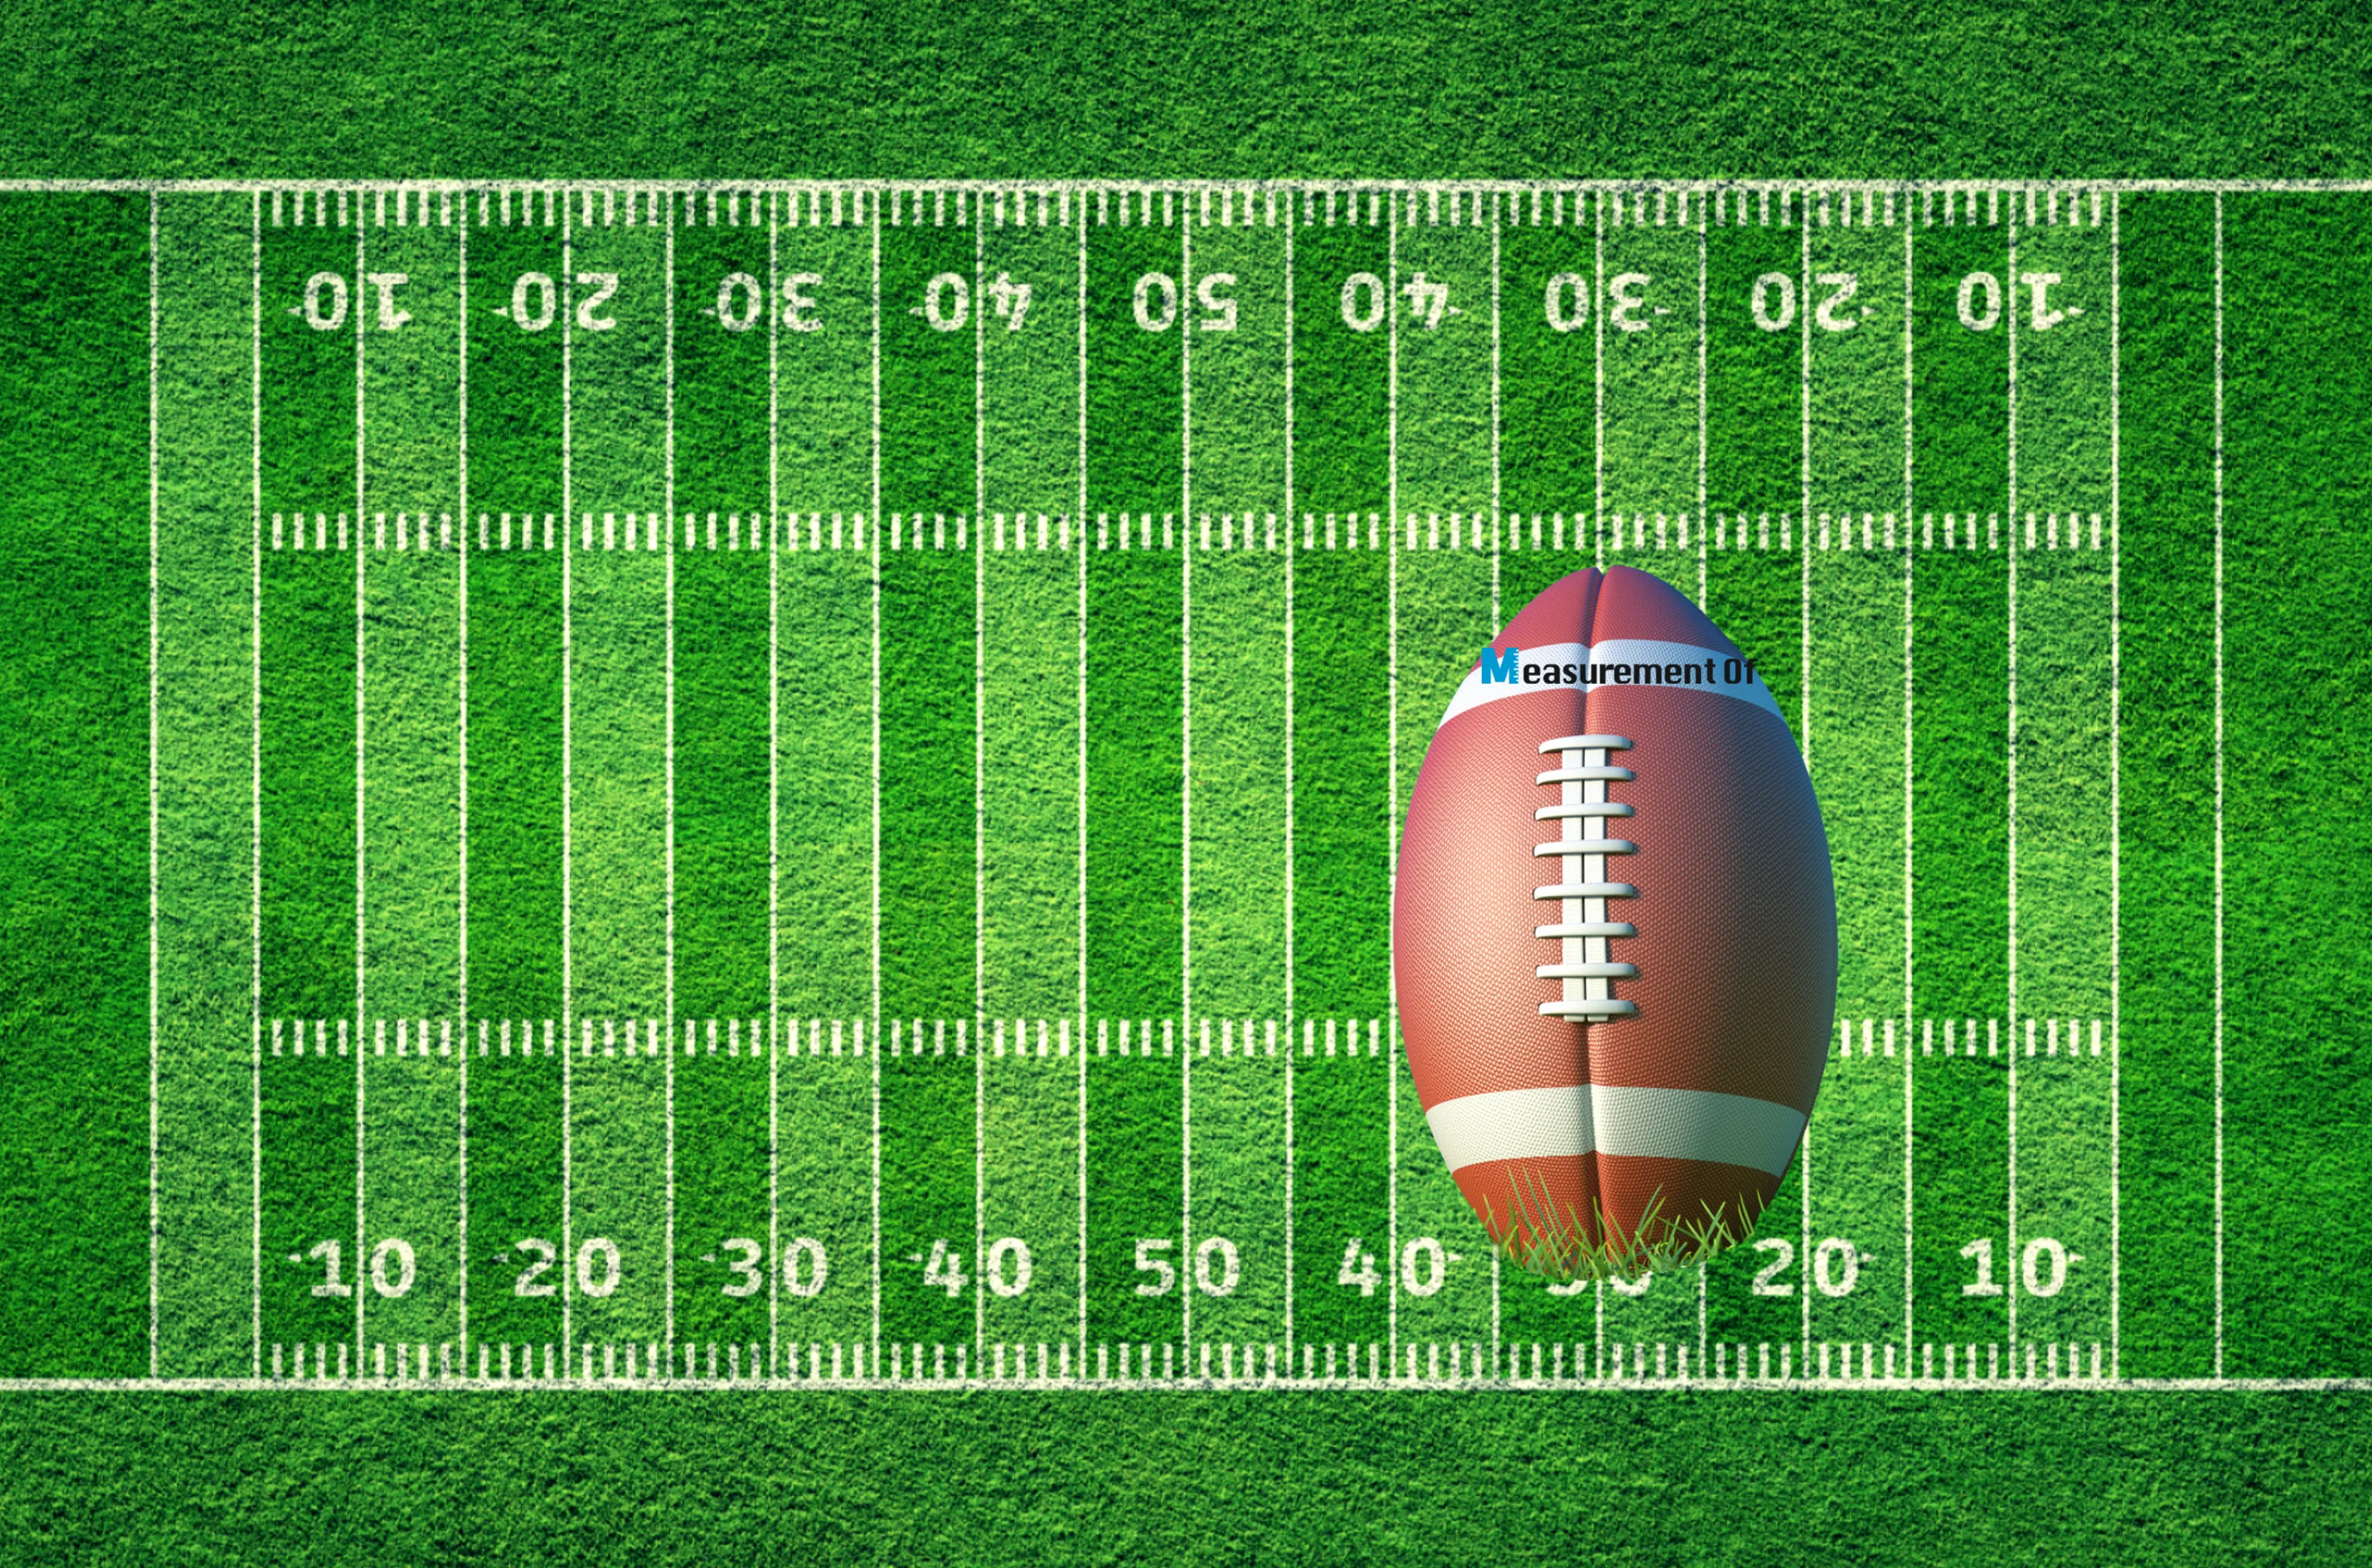 American Football Field Dimension - All You Need to Know blog header.webp